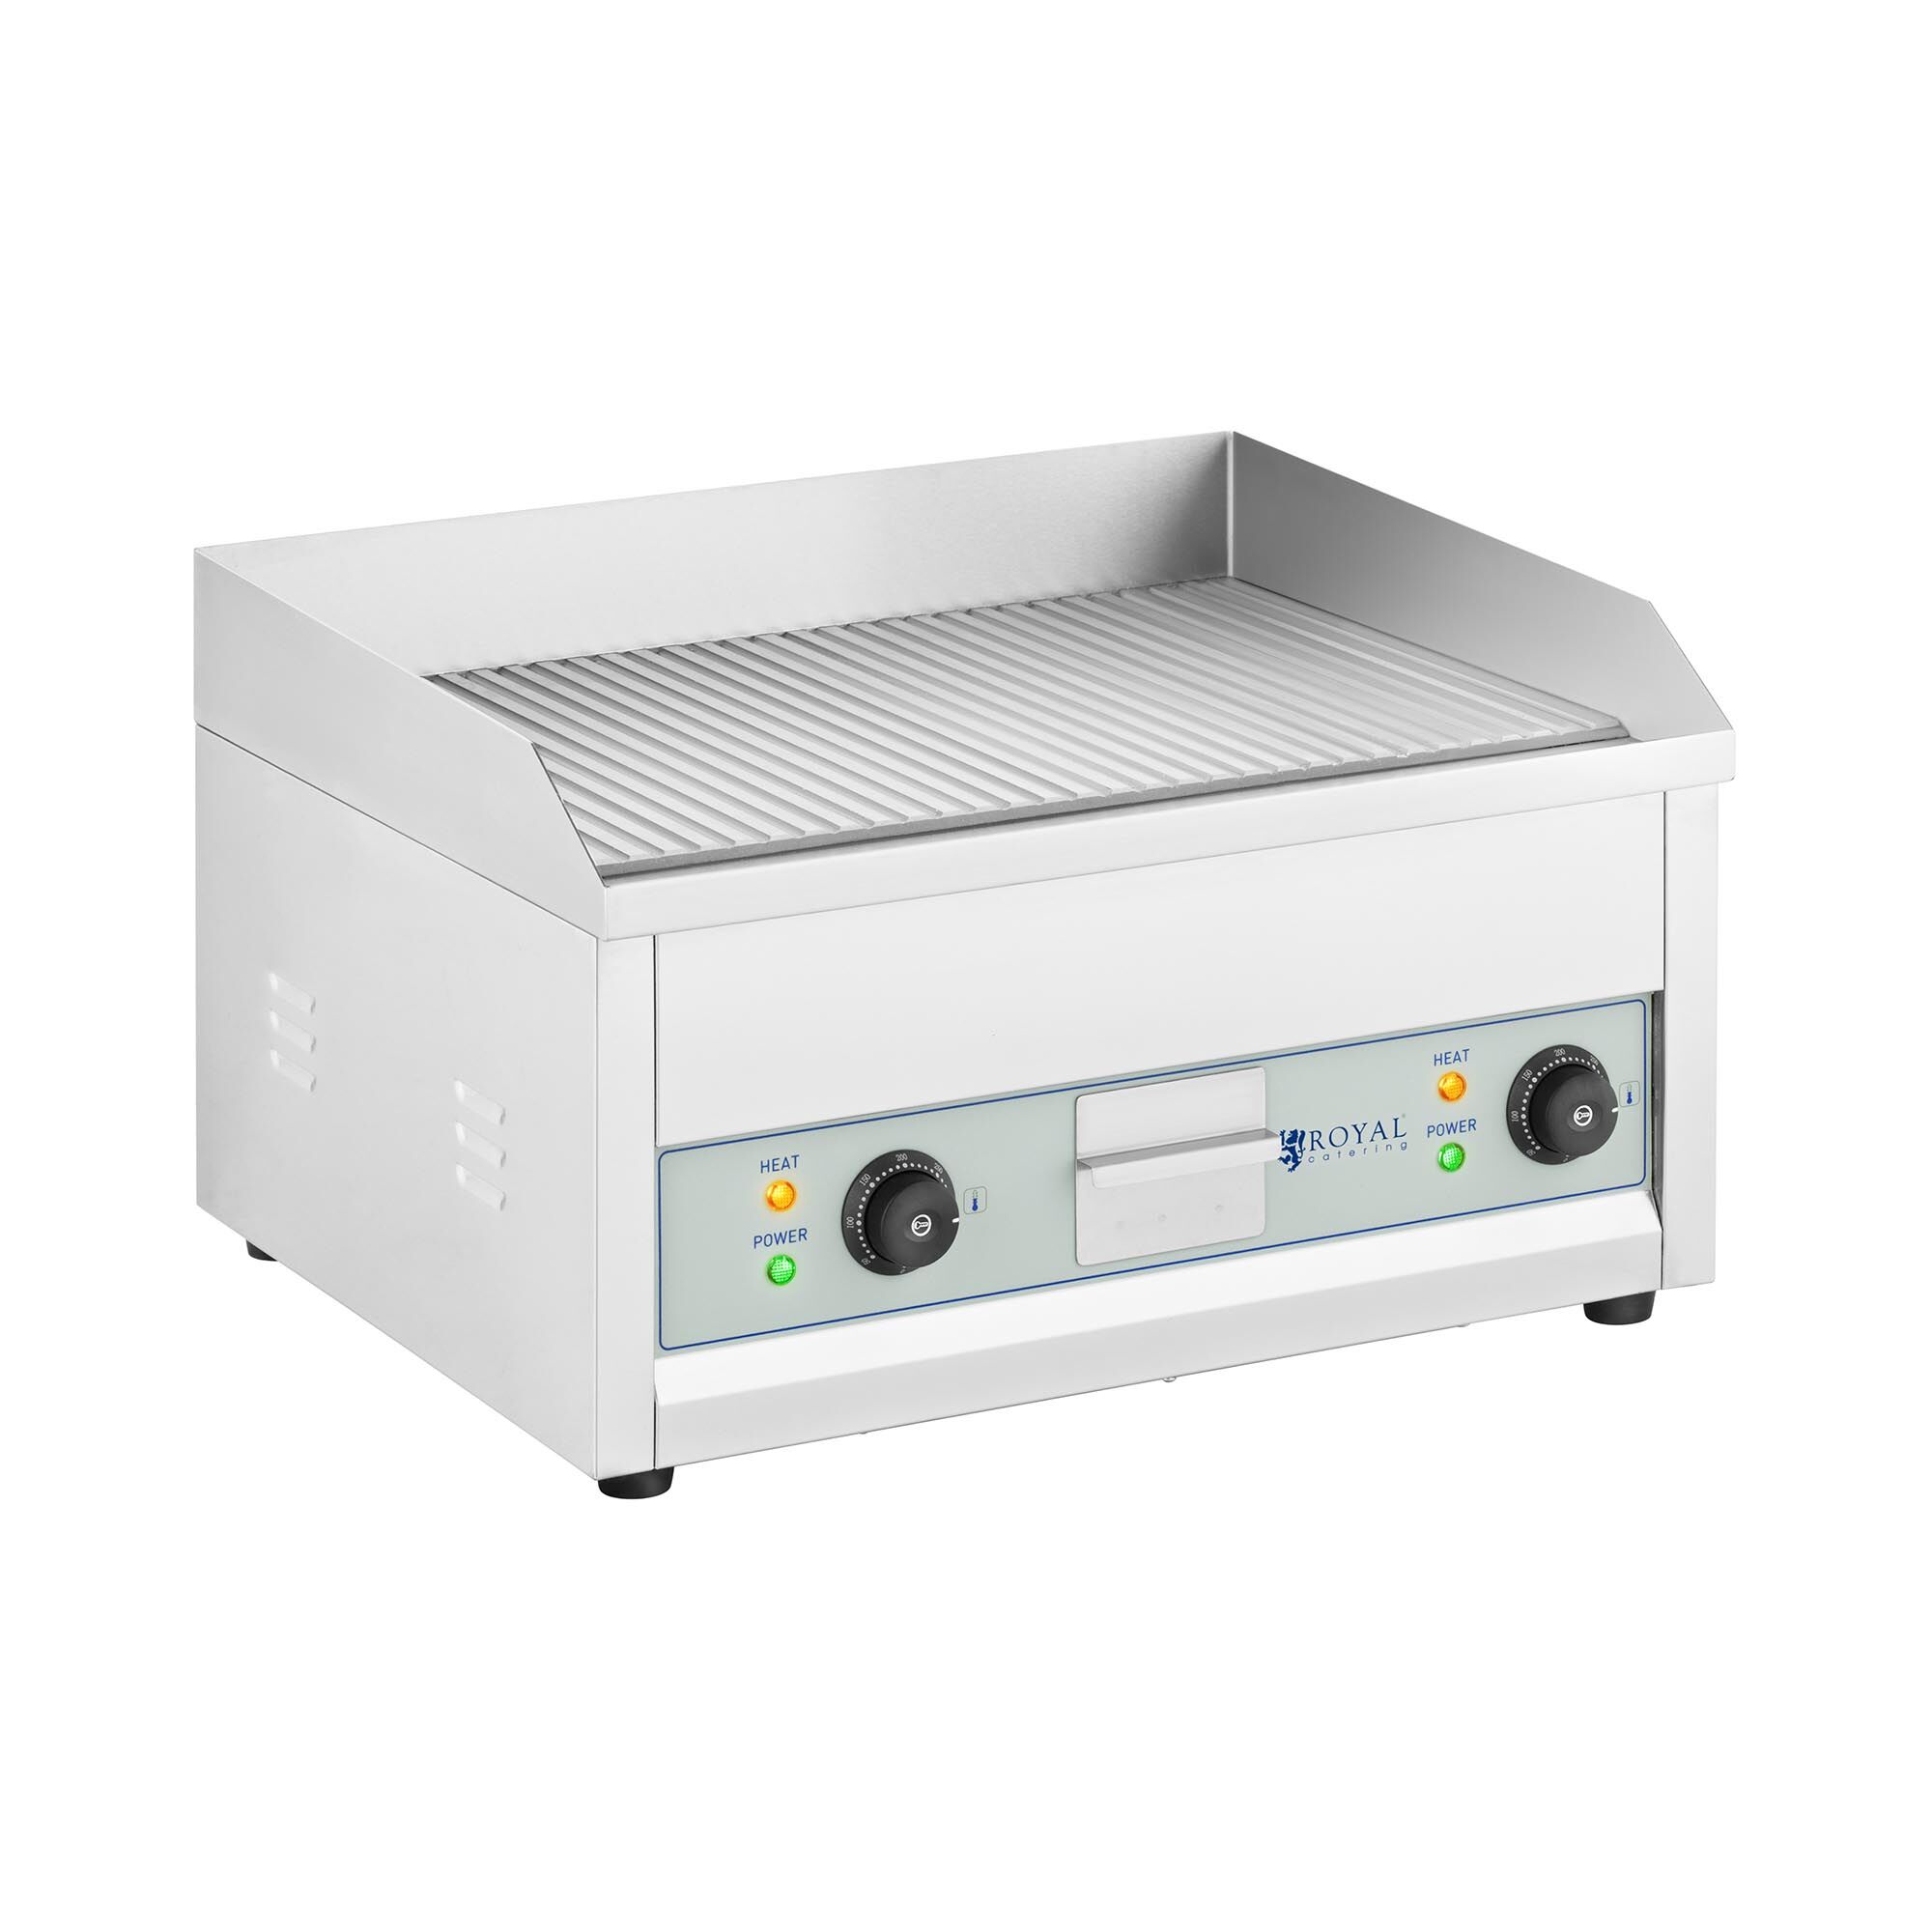 Royal Catering Doppel-Elektrogrill - 600 x 400 mm - Royal Catering - 2 x 2.500 W